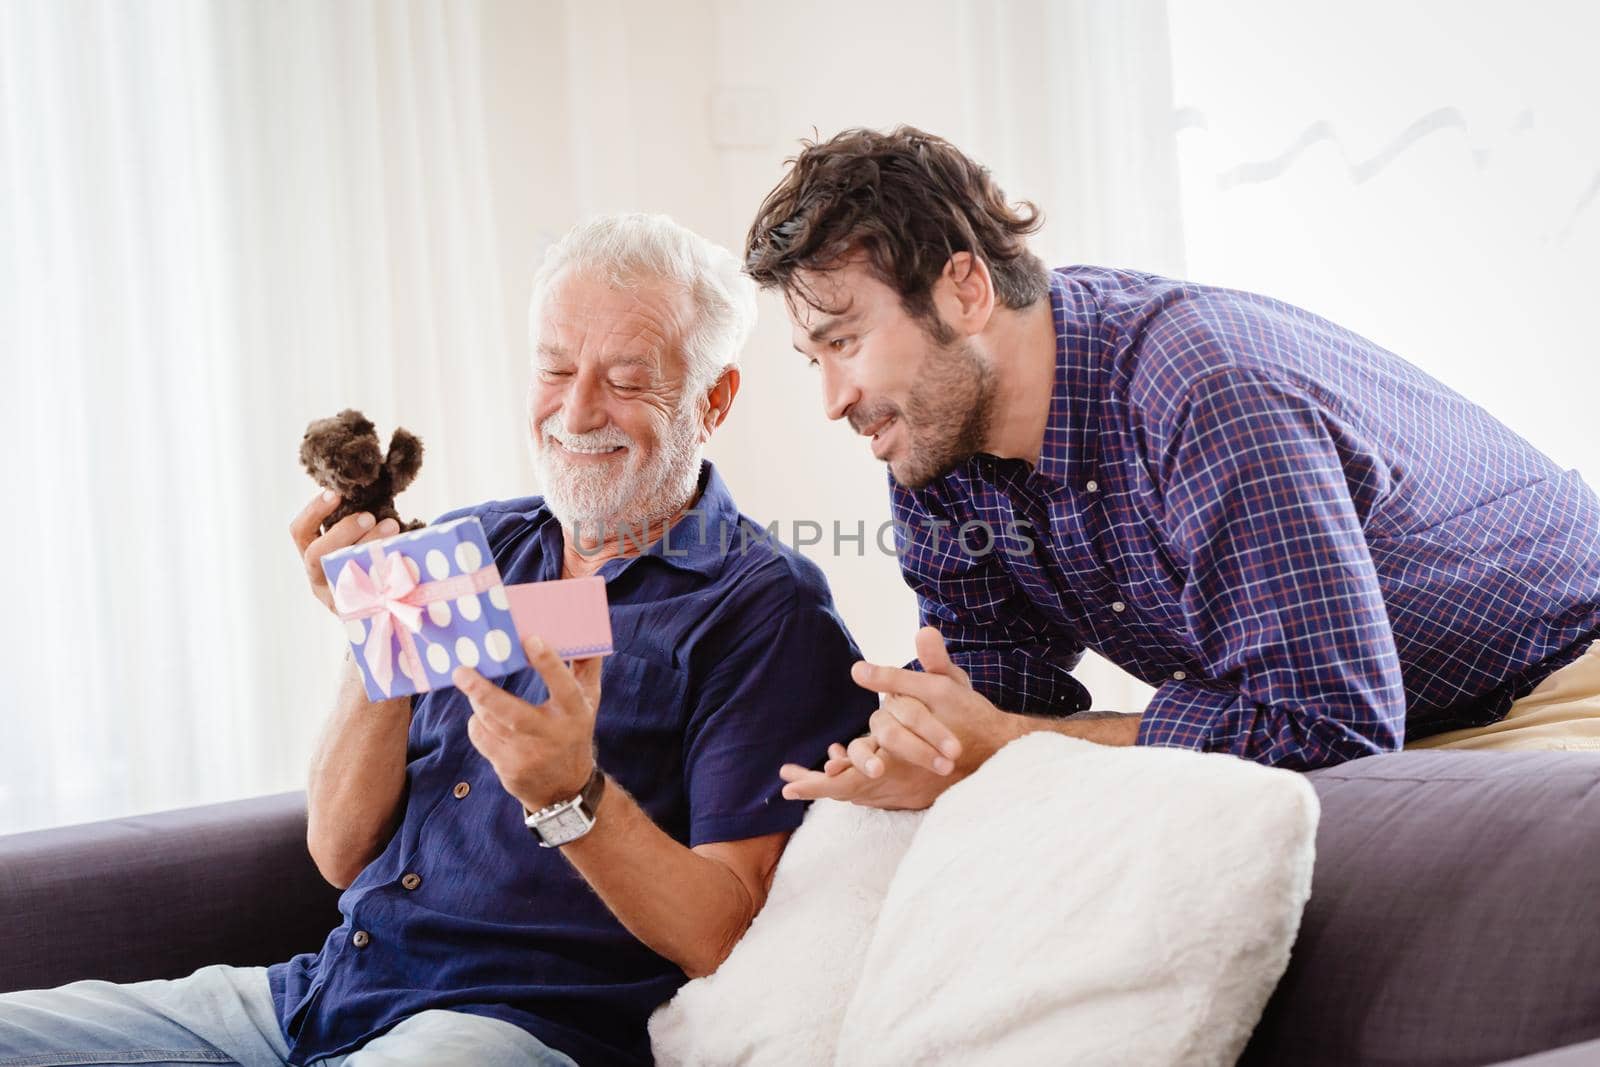 young man returned family home during the New Year's holiday with a cute gift box to the old man, Elder smiled and was very happy with teddy present.